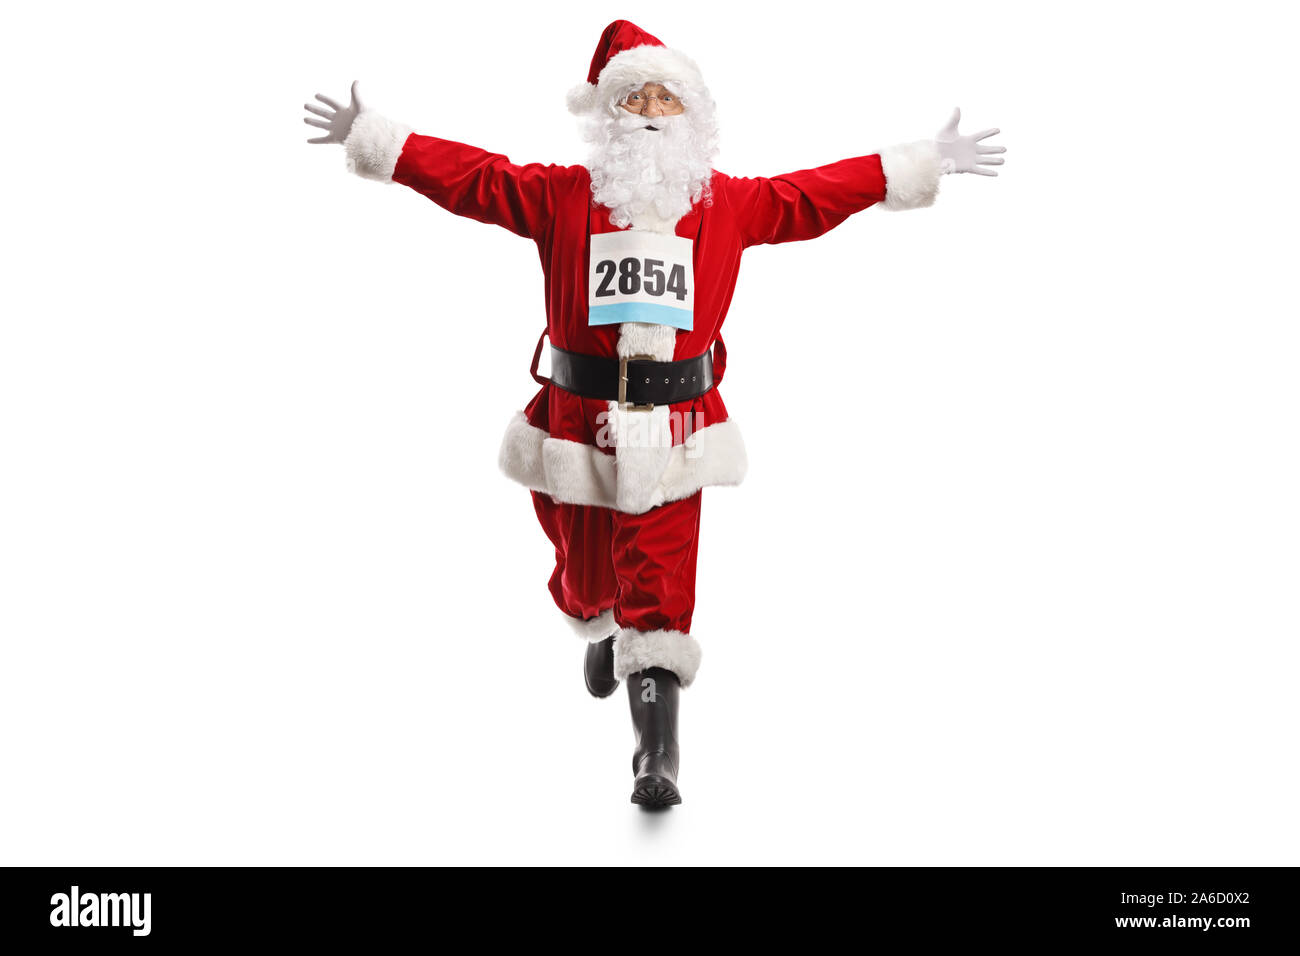 Full length portrait of Santa Claus running with a race number an spreading arms isolated on white background Stock Photo